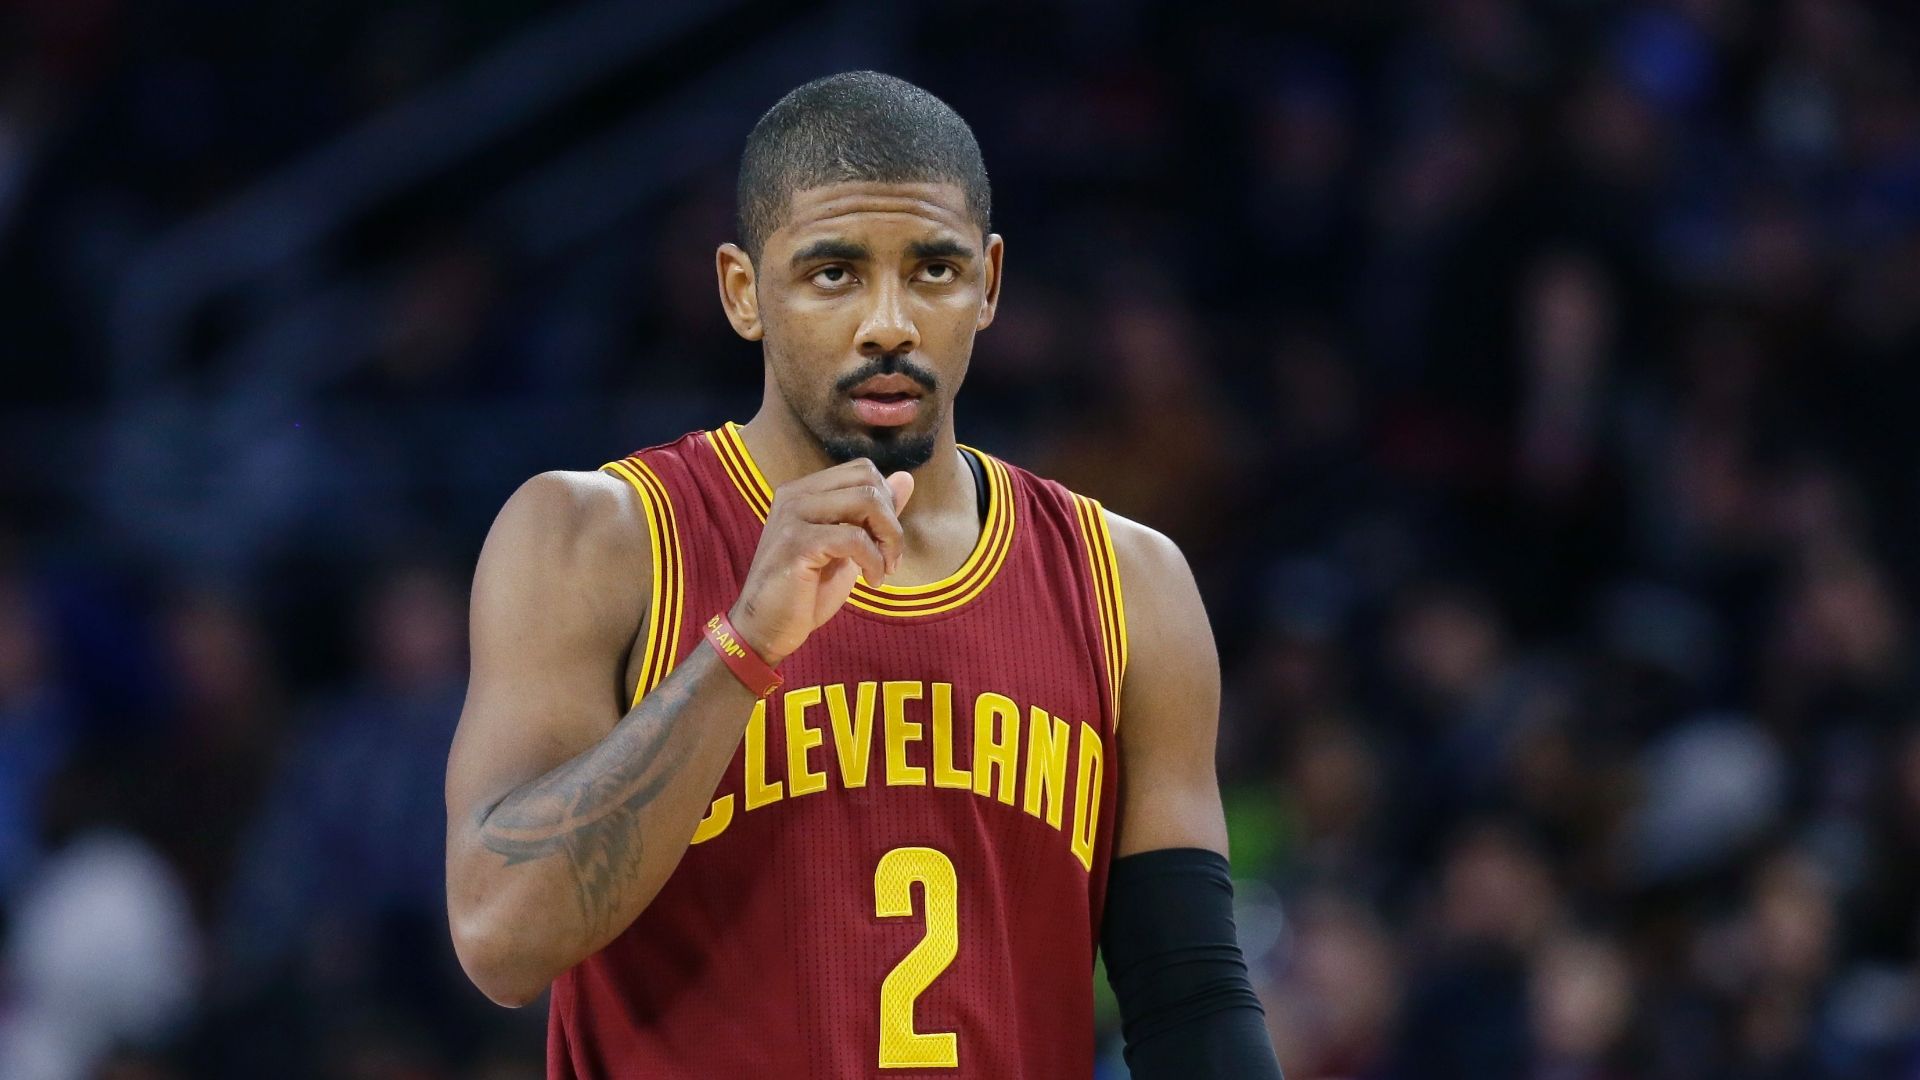 irving kyrie cavaliers bitten apology celtics bedbugs apologizes